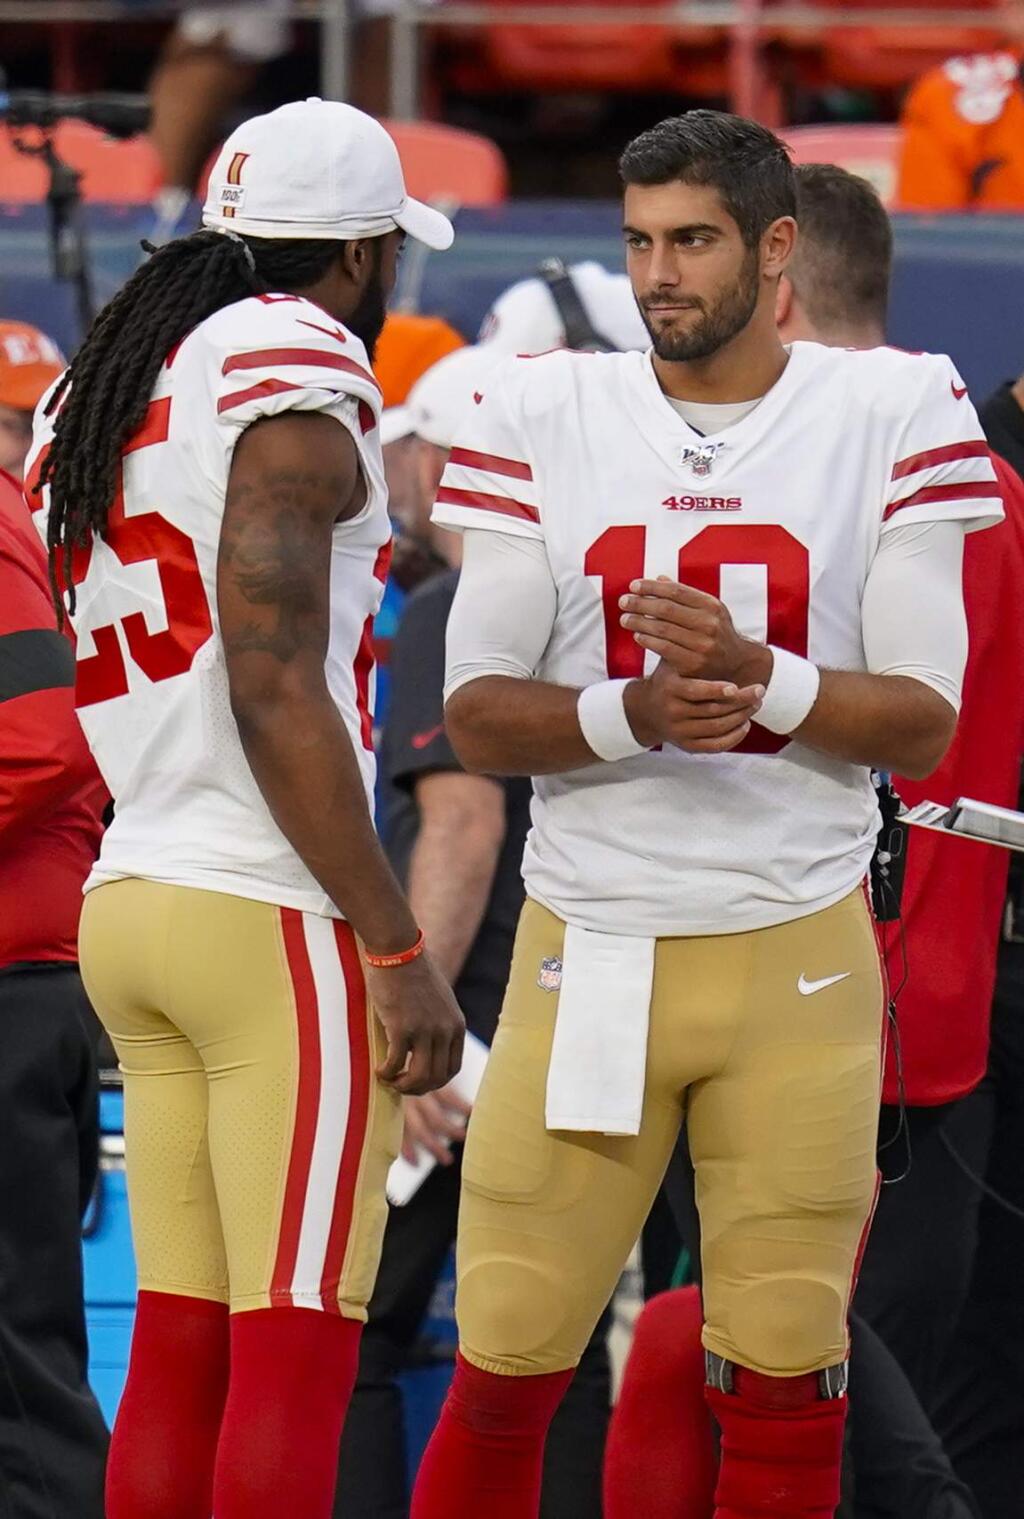 San Francisco 49ers quarterback Jimmy Garoppolo, right, and Richard Sherman talk on the sideline during a preseason game between the Denver Broncos and the San Francisco 49ers, Monday, Aug. 19, 2019, in Denver. (AP Photo/Jack Dempsey)